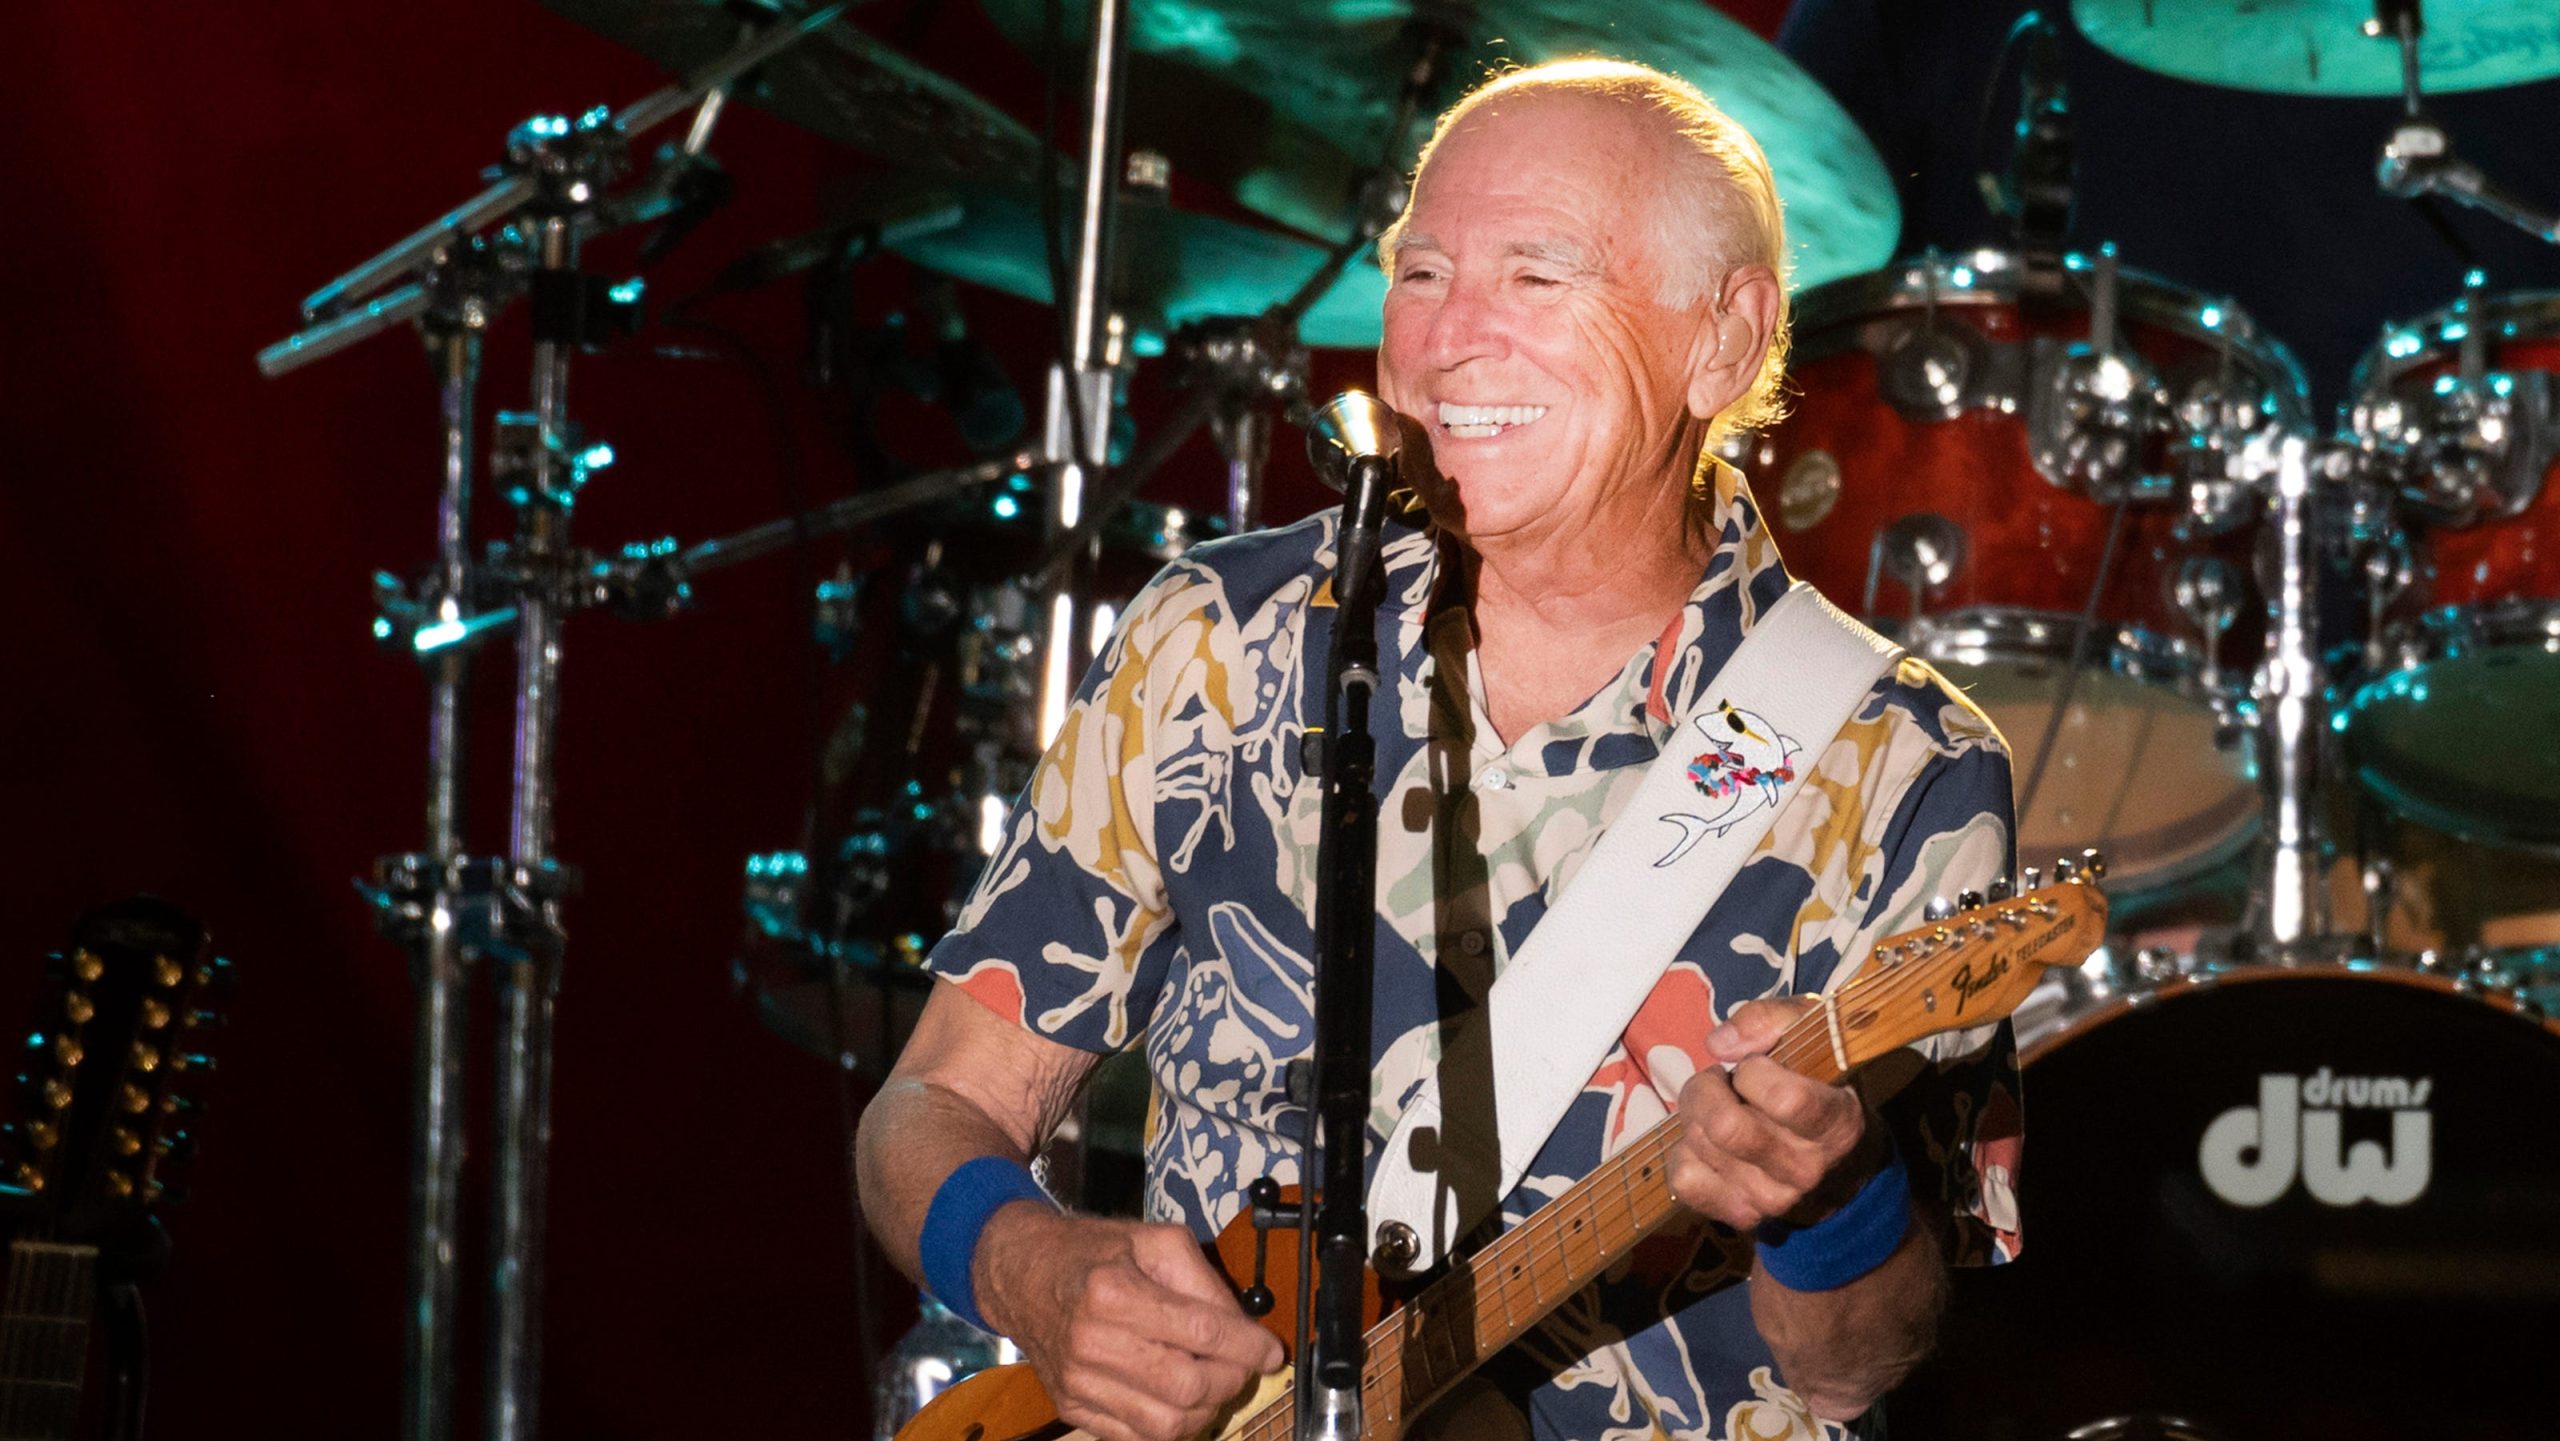 Summerfest: Jimmy Buffett Concert Canceled - Discover the Surprising Replacement and Fans' Reactions! 17